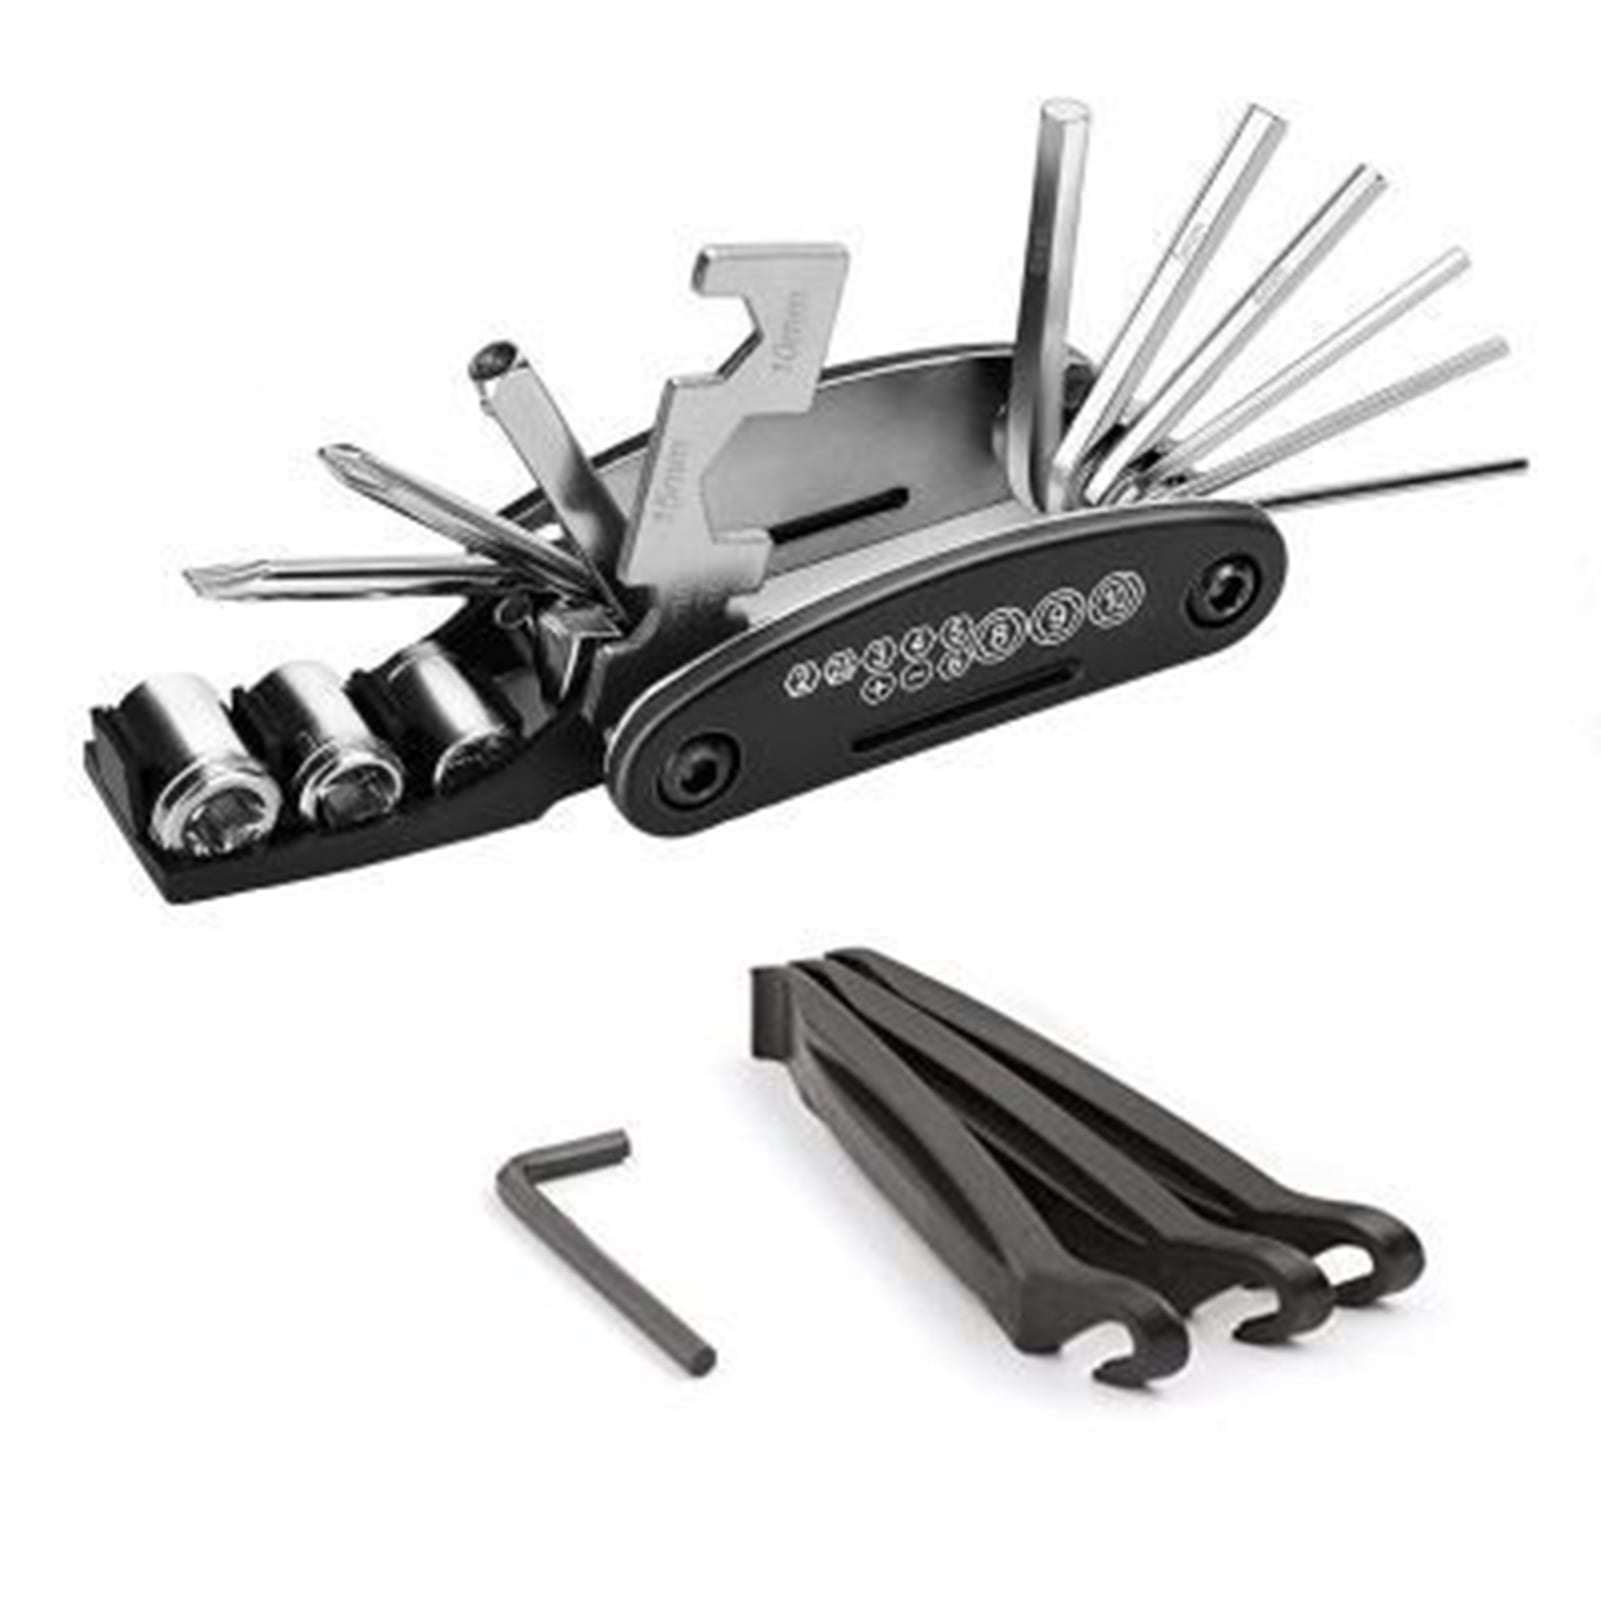 Details about   16 in 1 Multi-Function Basic Portable Bike Bicycle Cycling Mechanic Repair Tool 